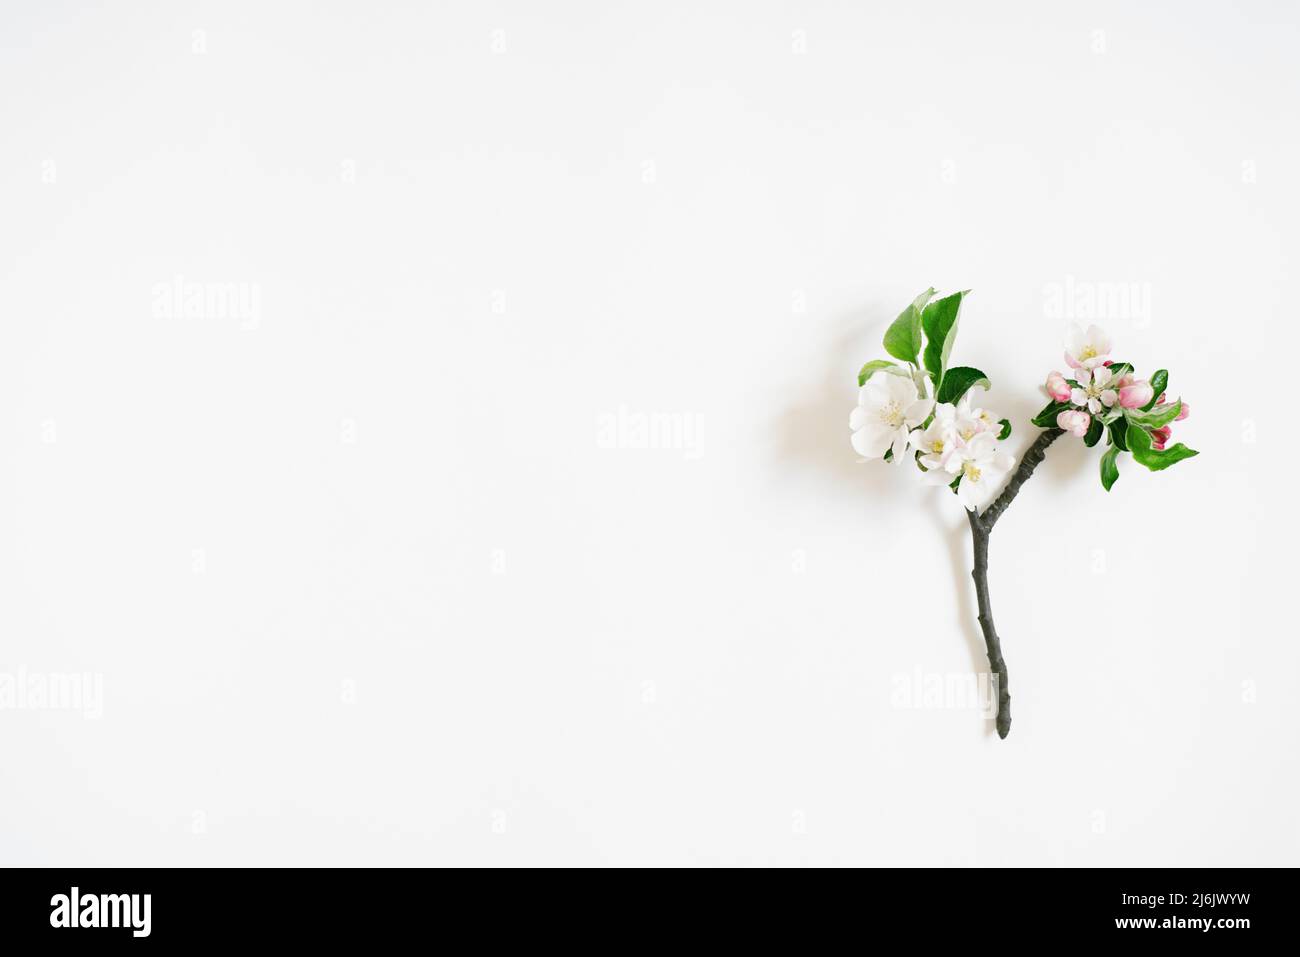 Small sprig of apple tree with white flowers on a white background with copy space. Creative greeting card. Flat lay, top view Stock Photo